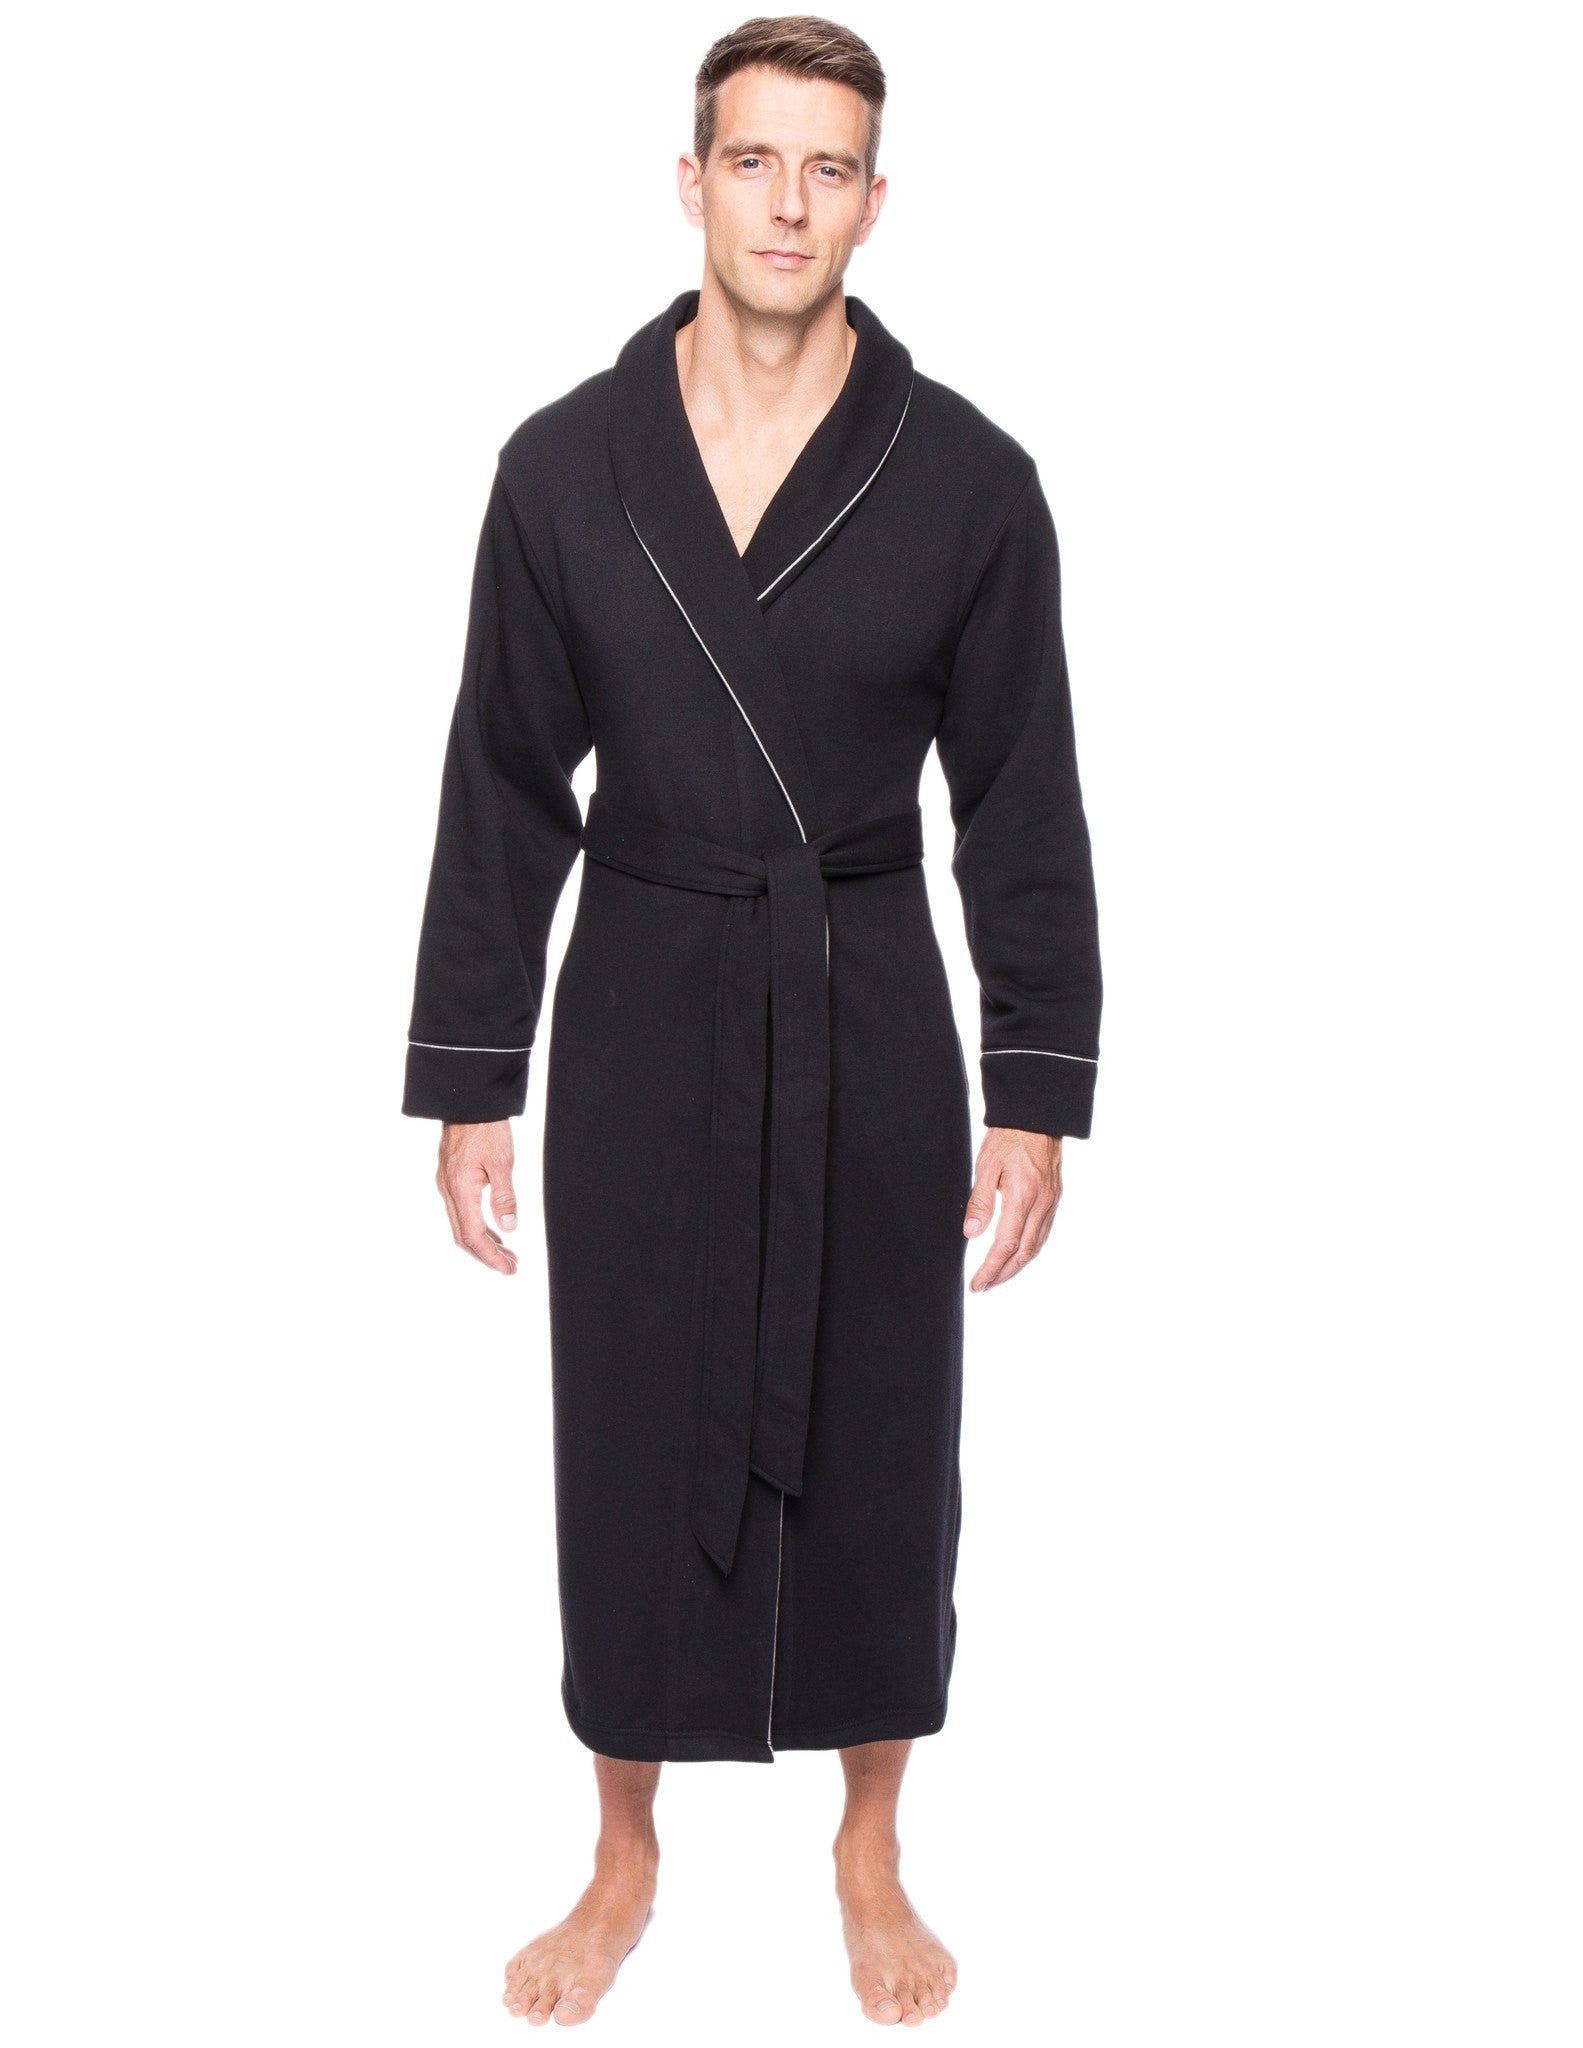 Men's Fleece Lined French Terry Robe – Noble Mount